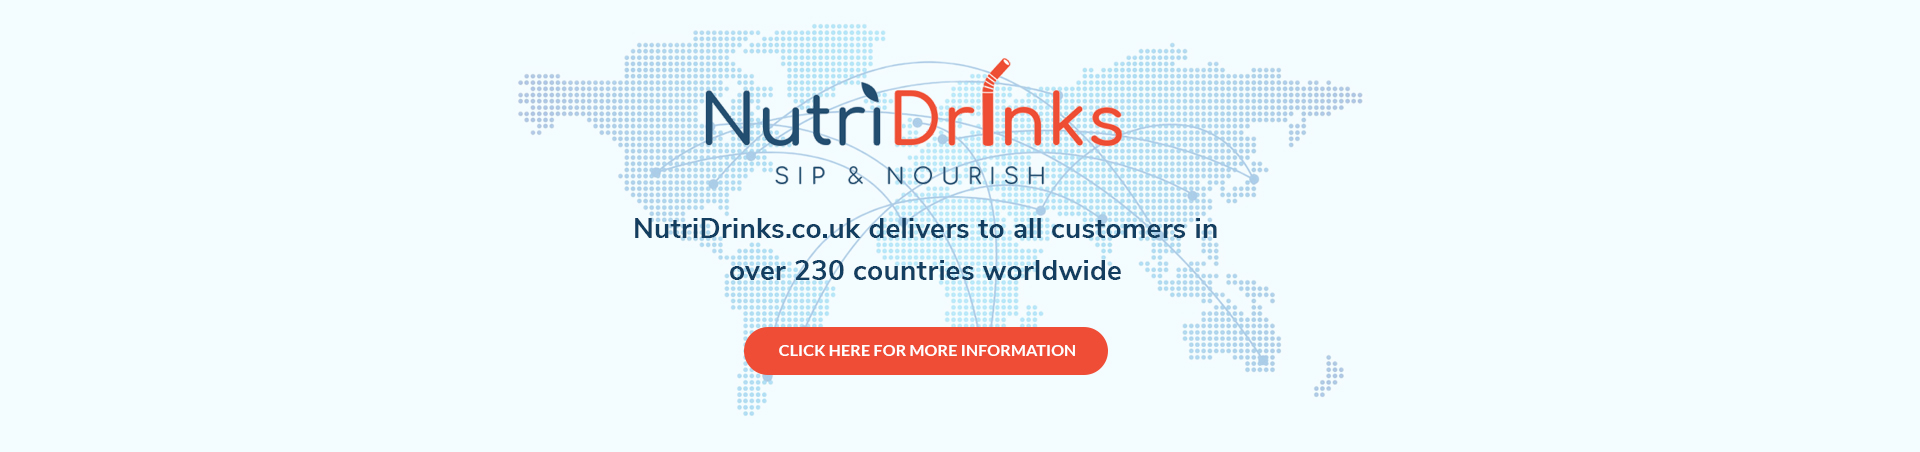 International Delivery Service with NutriDrinks.co.uk